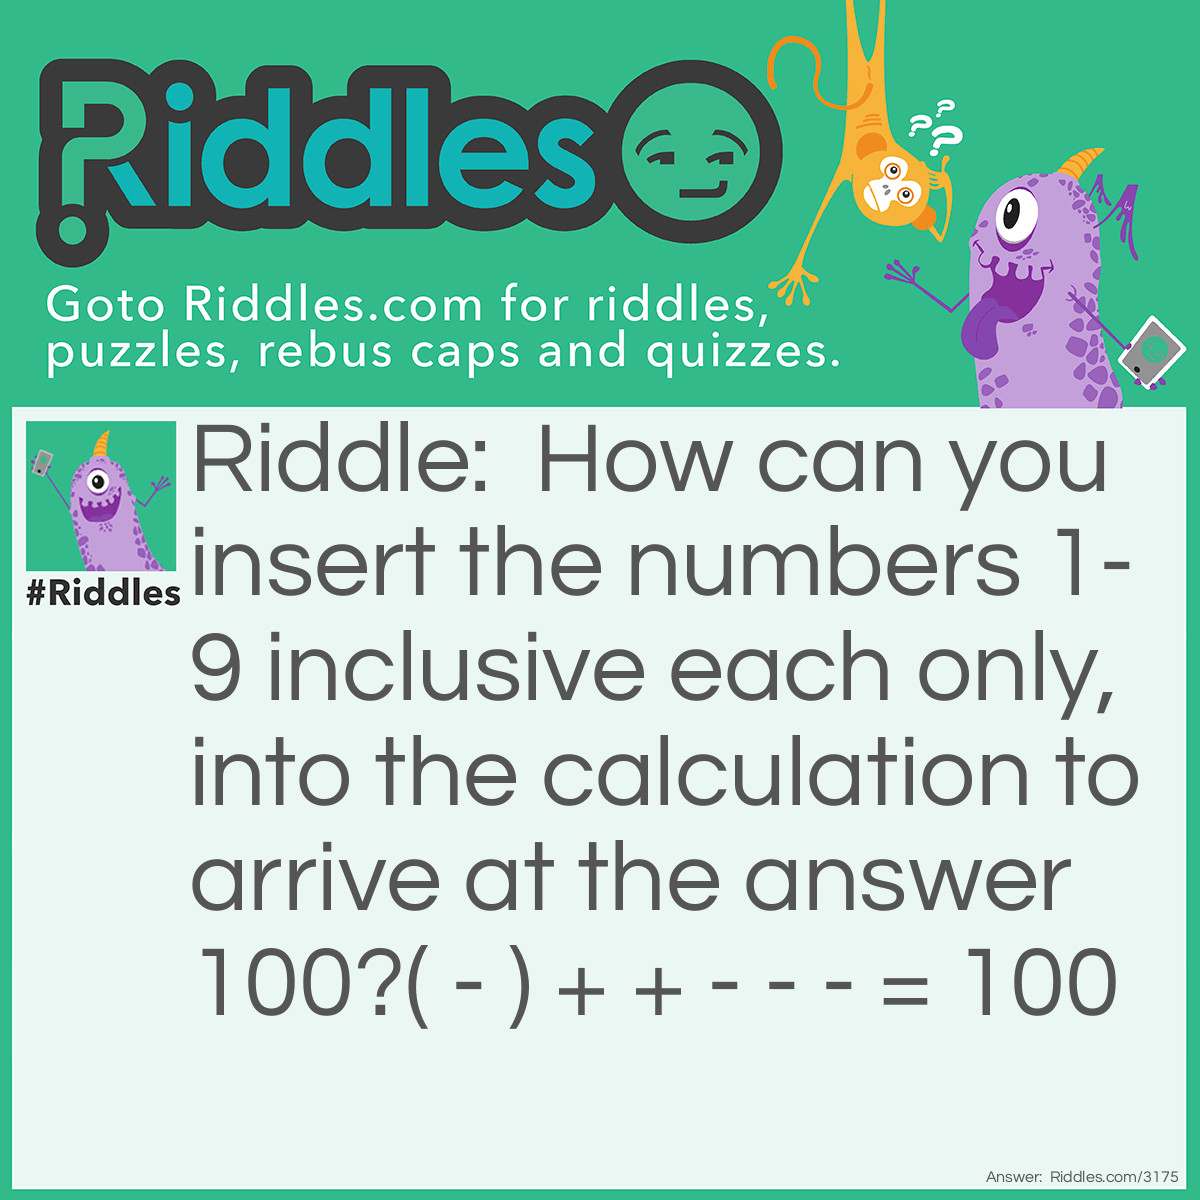 Riddle: How can you insert the numbers 1-9 inclusive each only, into the calculation to arrive at the answer 100?
( - ) + + - - - = 100 Answer: ( 7 - 5 )²  + 96 + 8 - 4 - 3 - 1 = 100